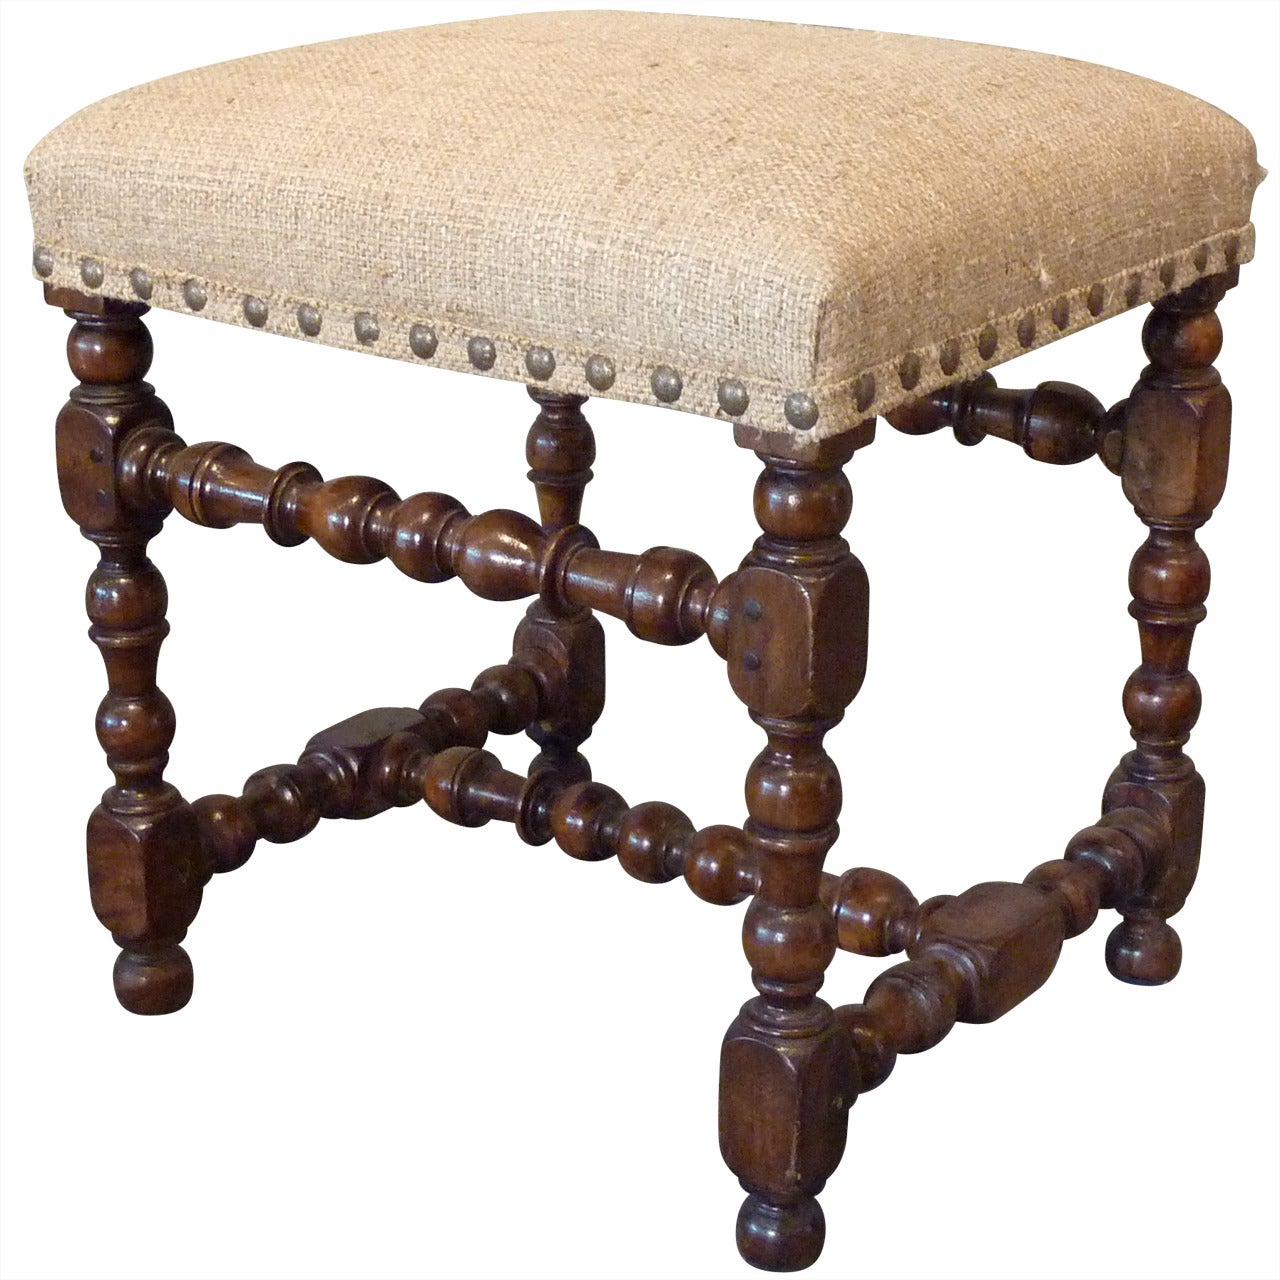 Louis XIII Period 17th Century French Provincial Stool.